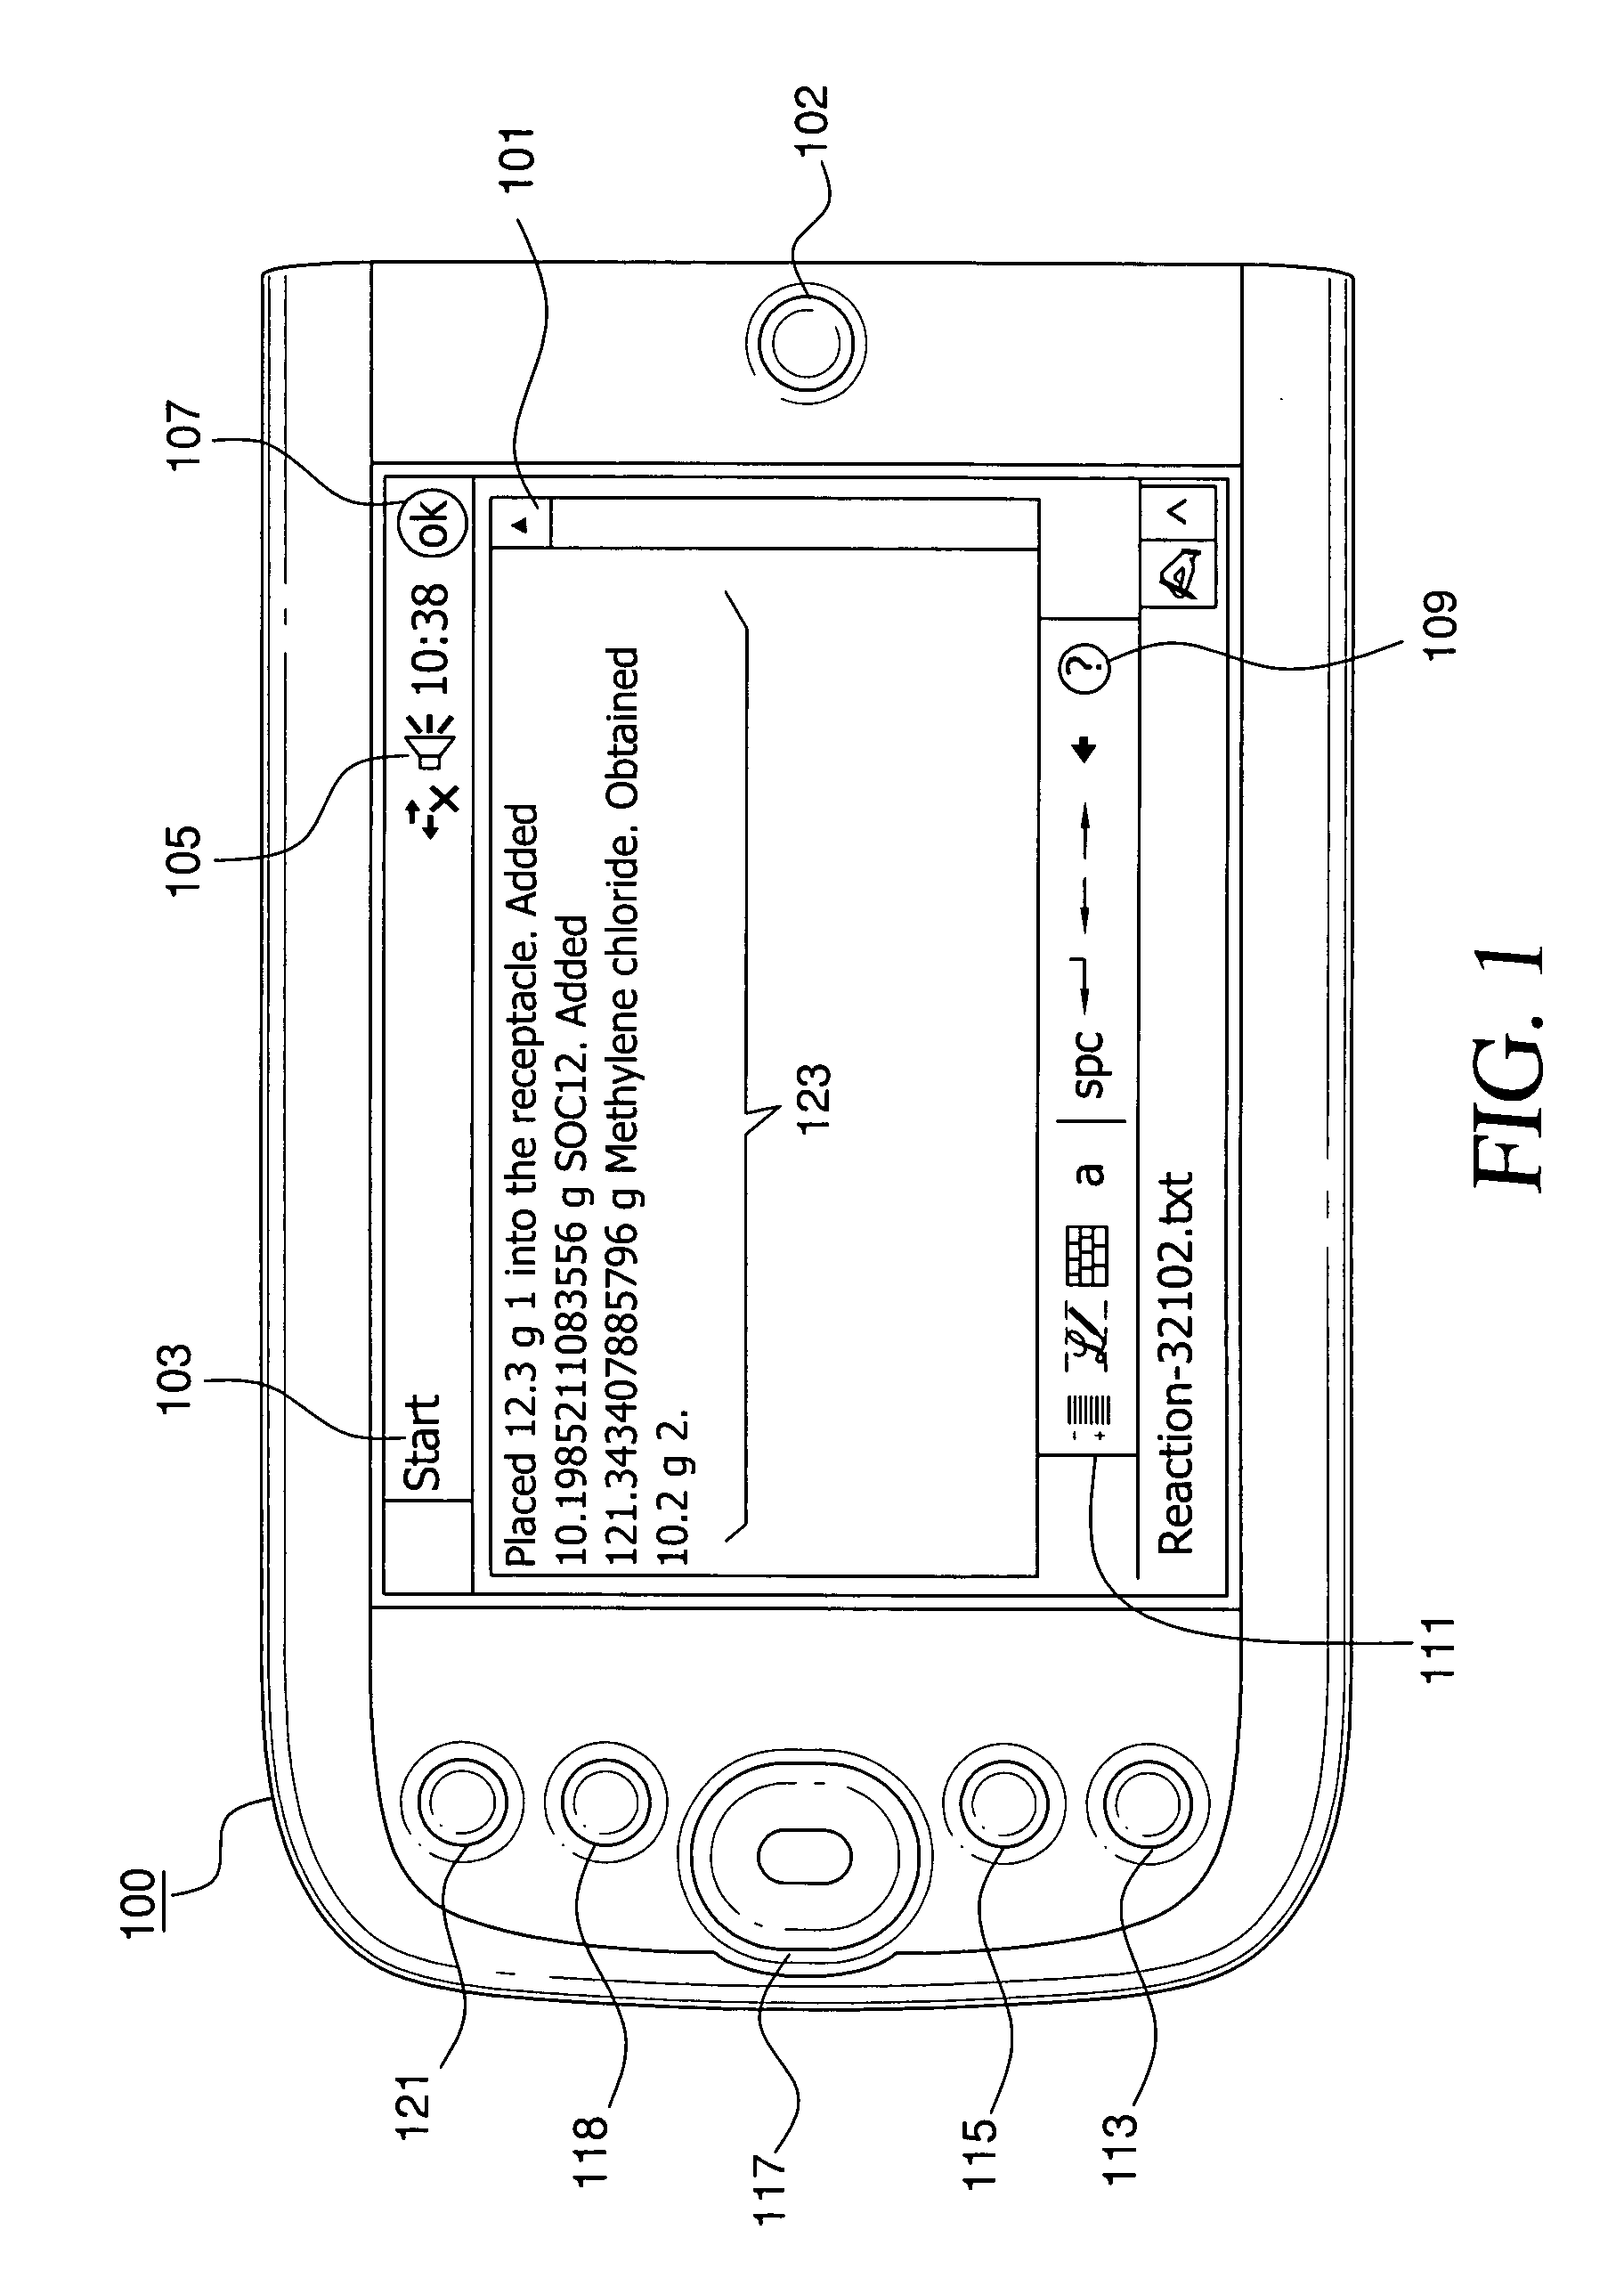 Apparatus and method for mobile graphical cheminformatic